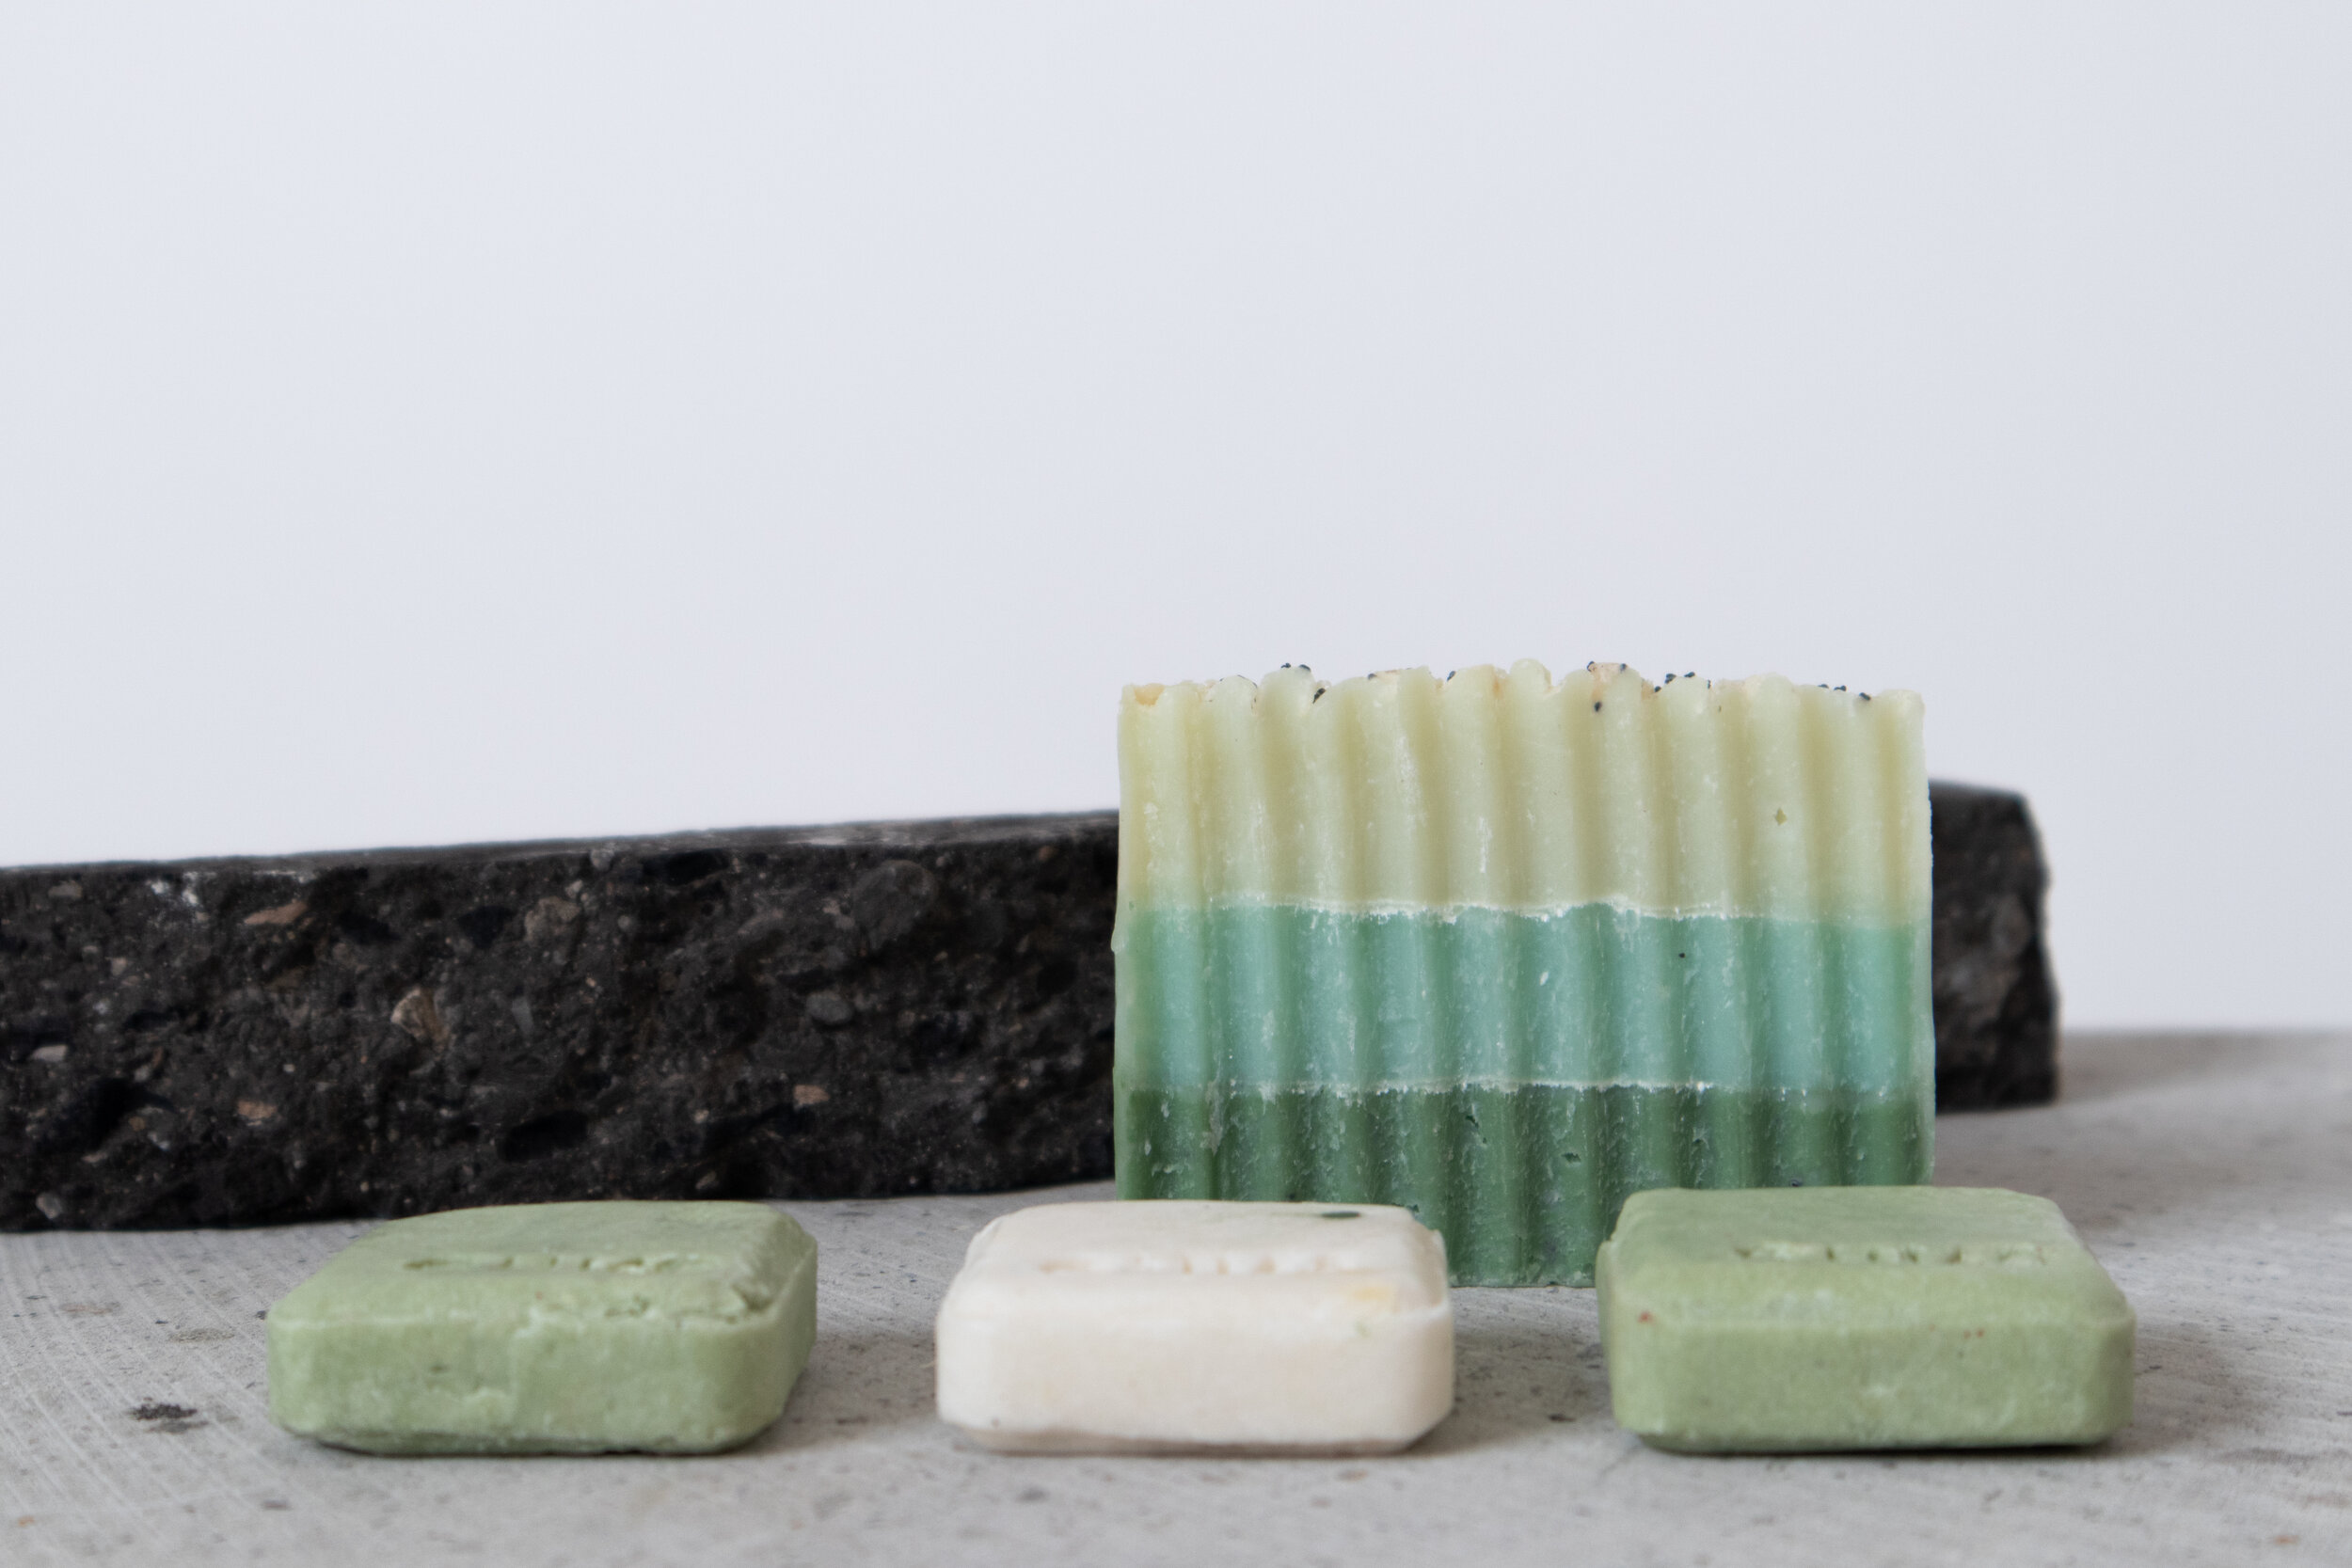 soaps creative campaign, art direction, styling & photography 24.jpg